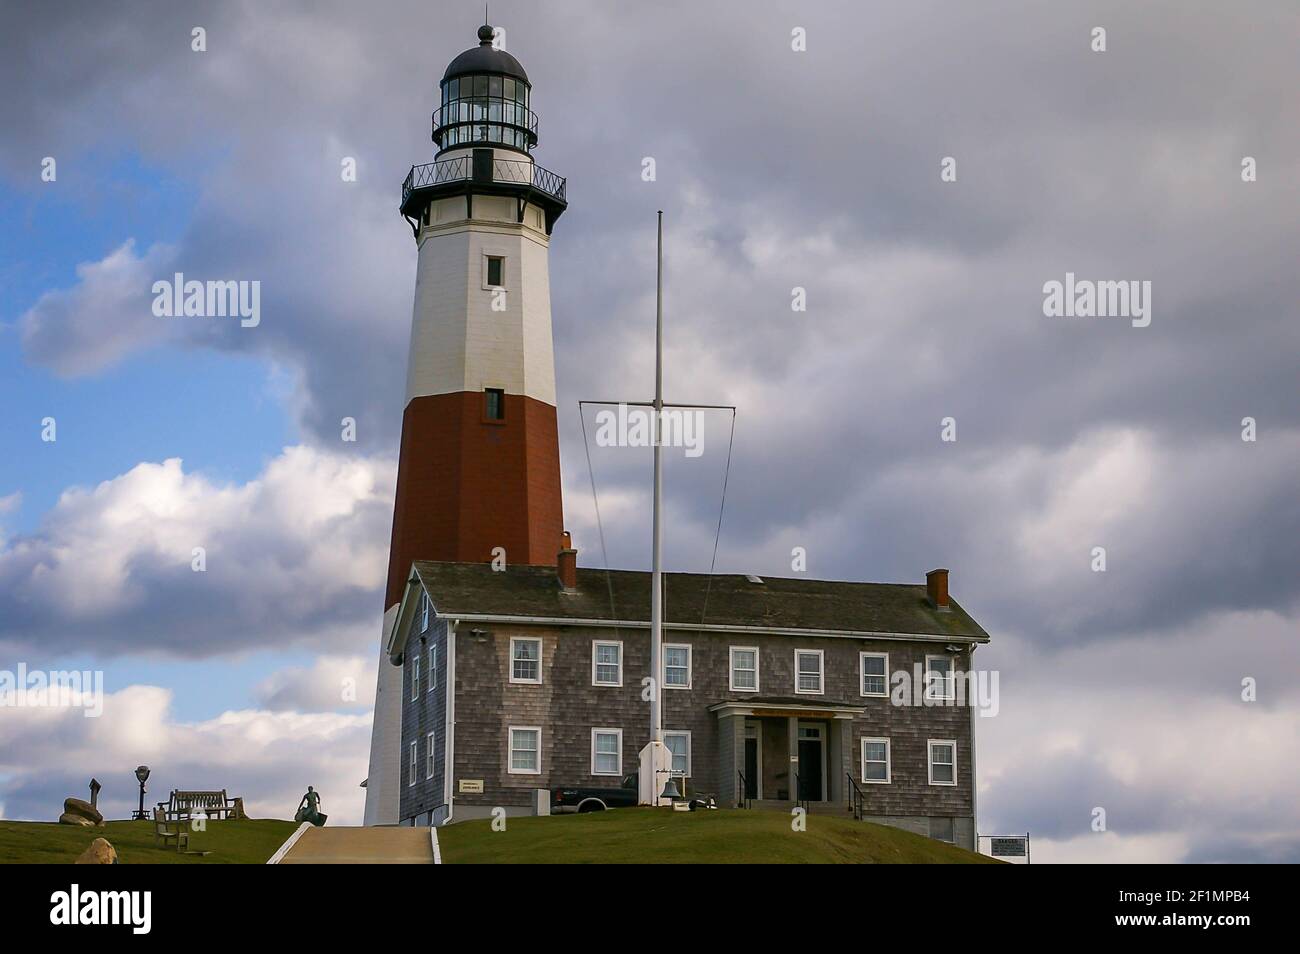 The Montauk lighthouse on Long Island in New York State in the USA Stock Photo